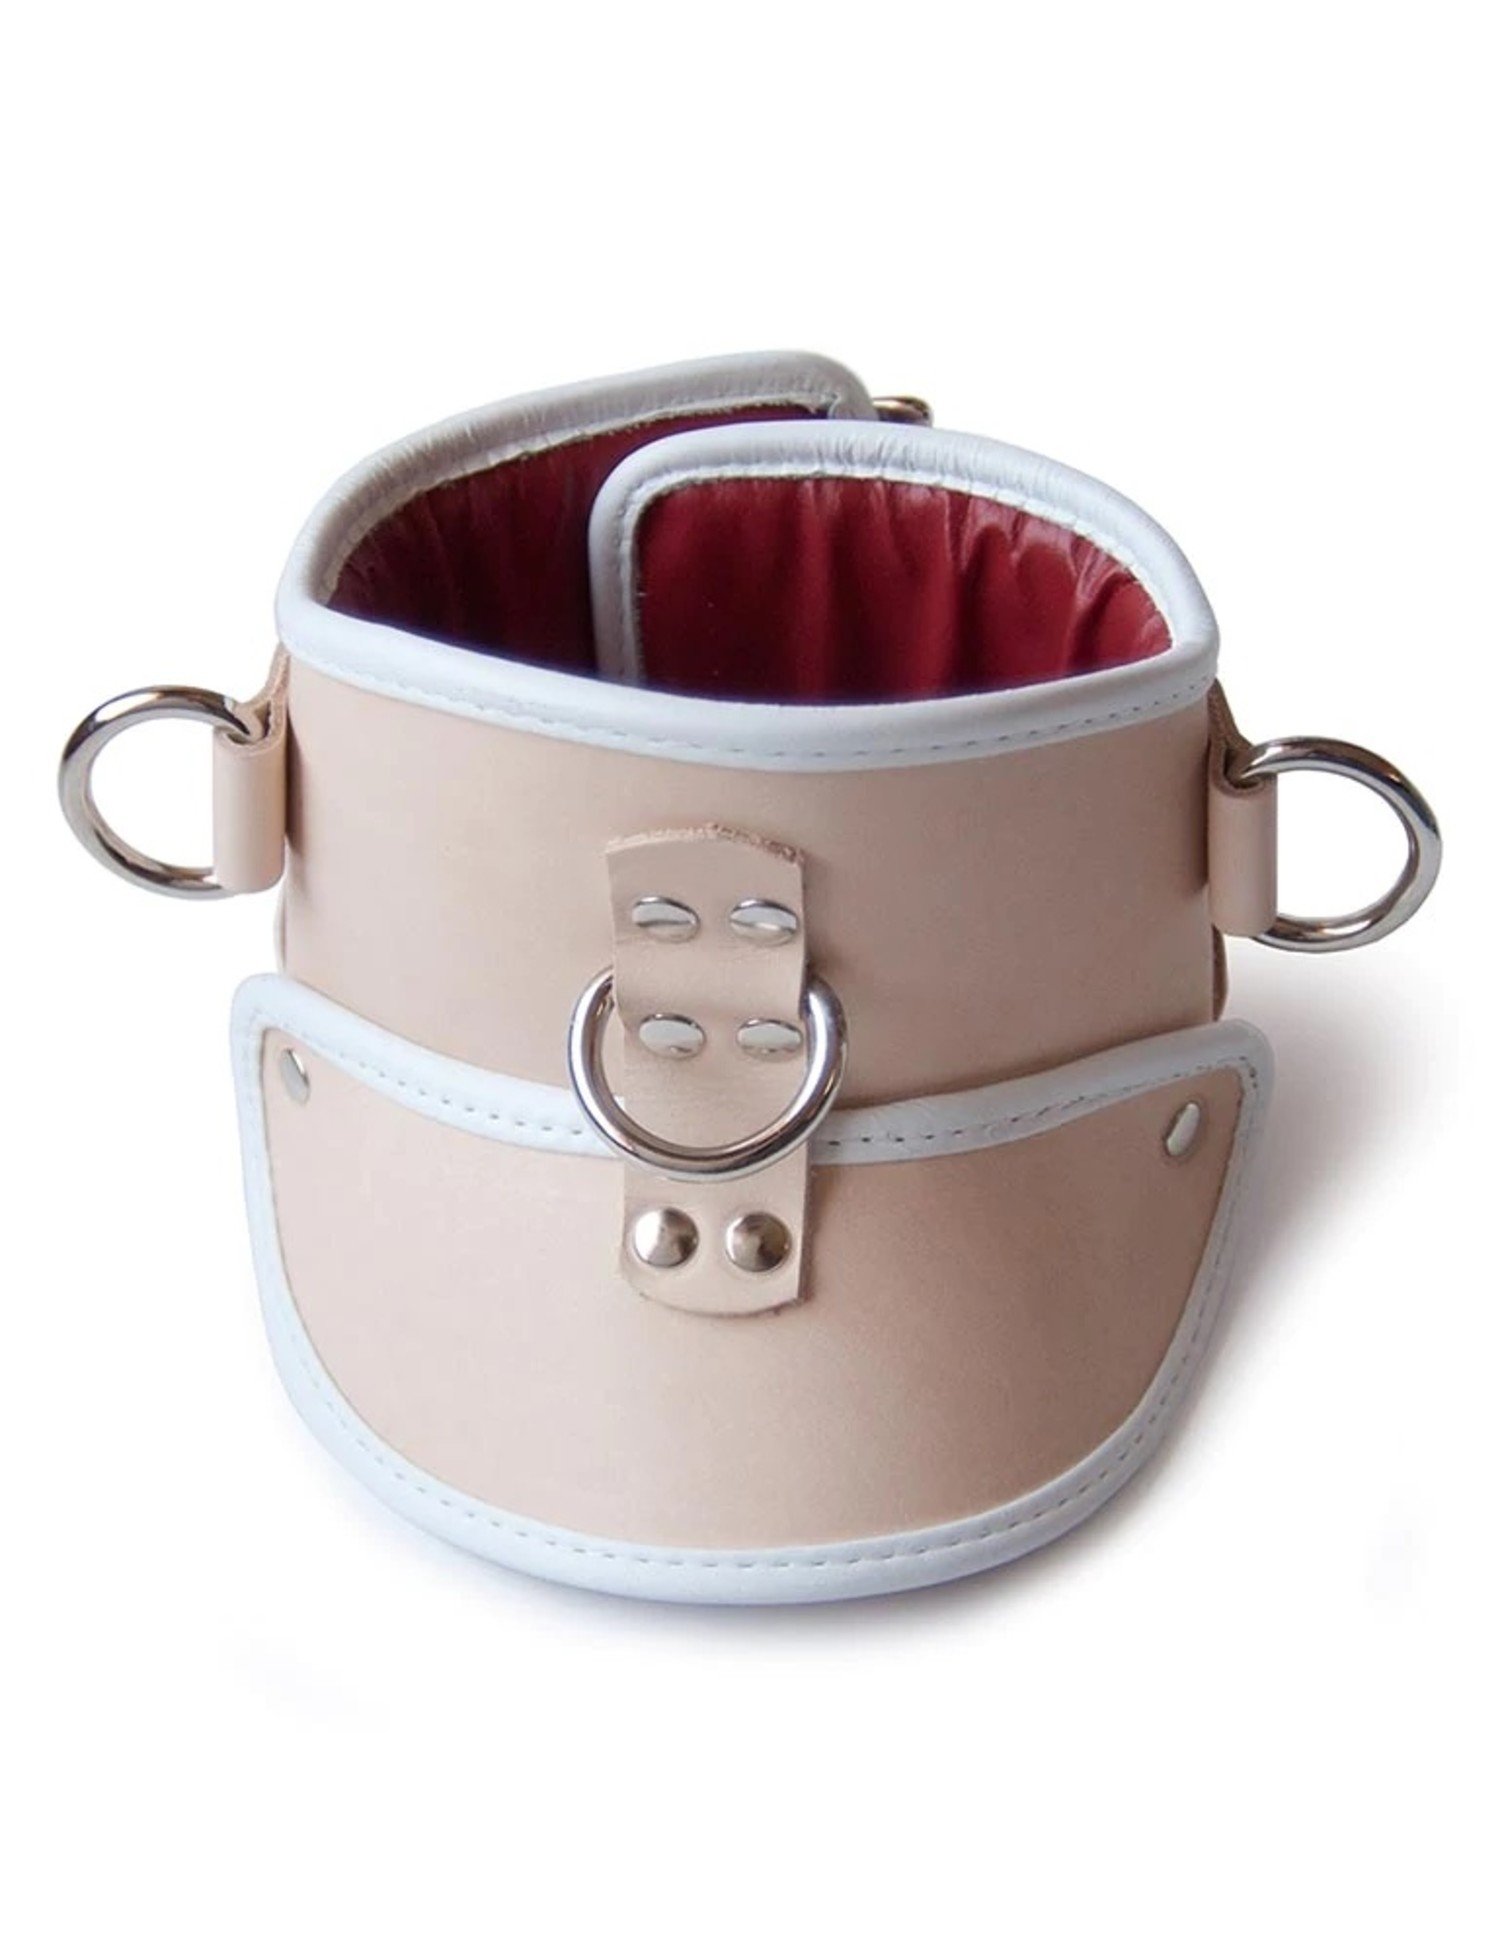 Deluxe Padded Medical Posture Collar by Stockroom